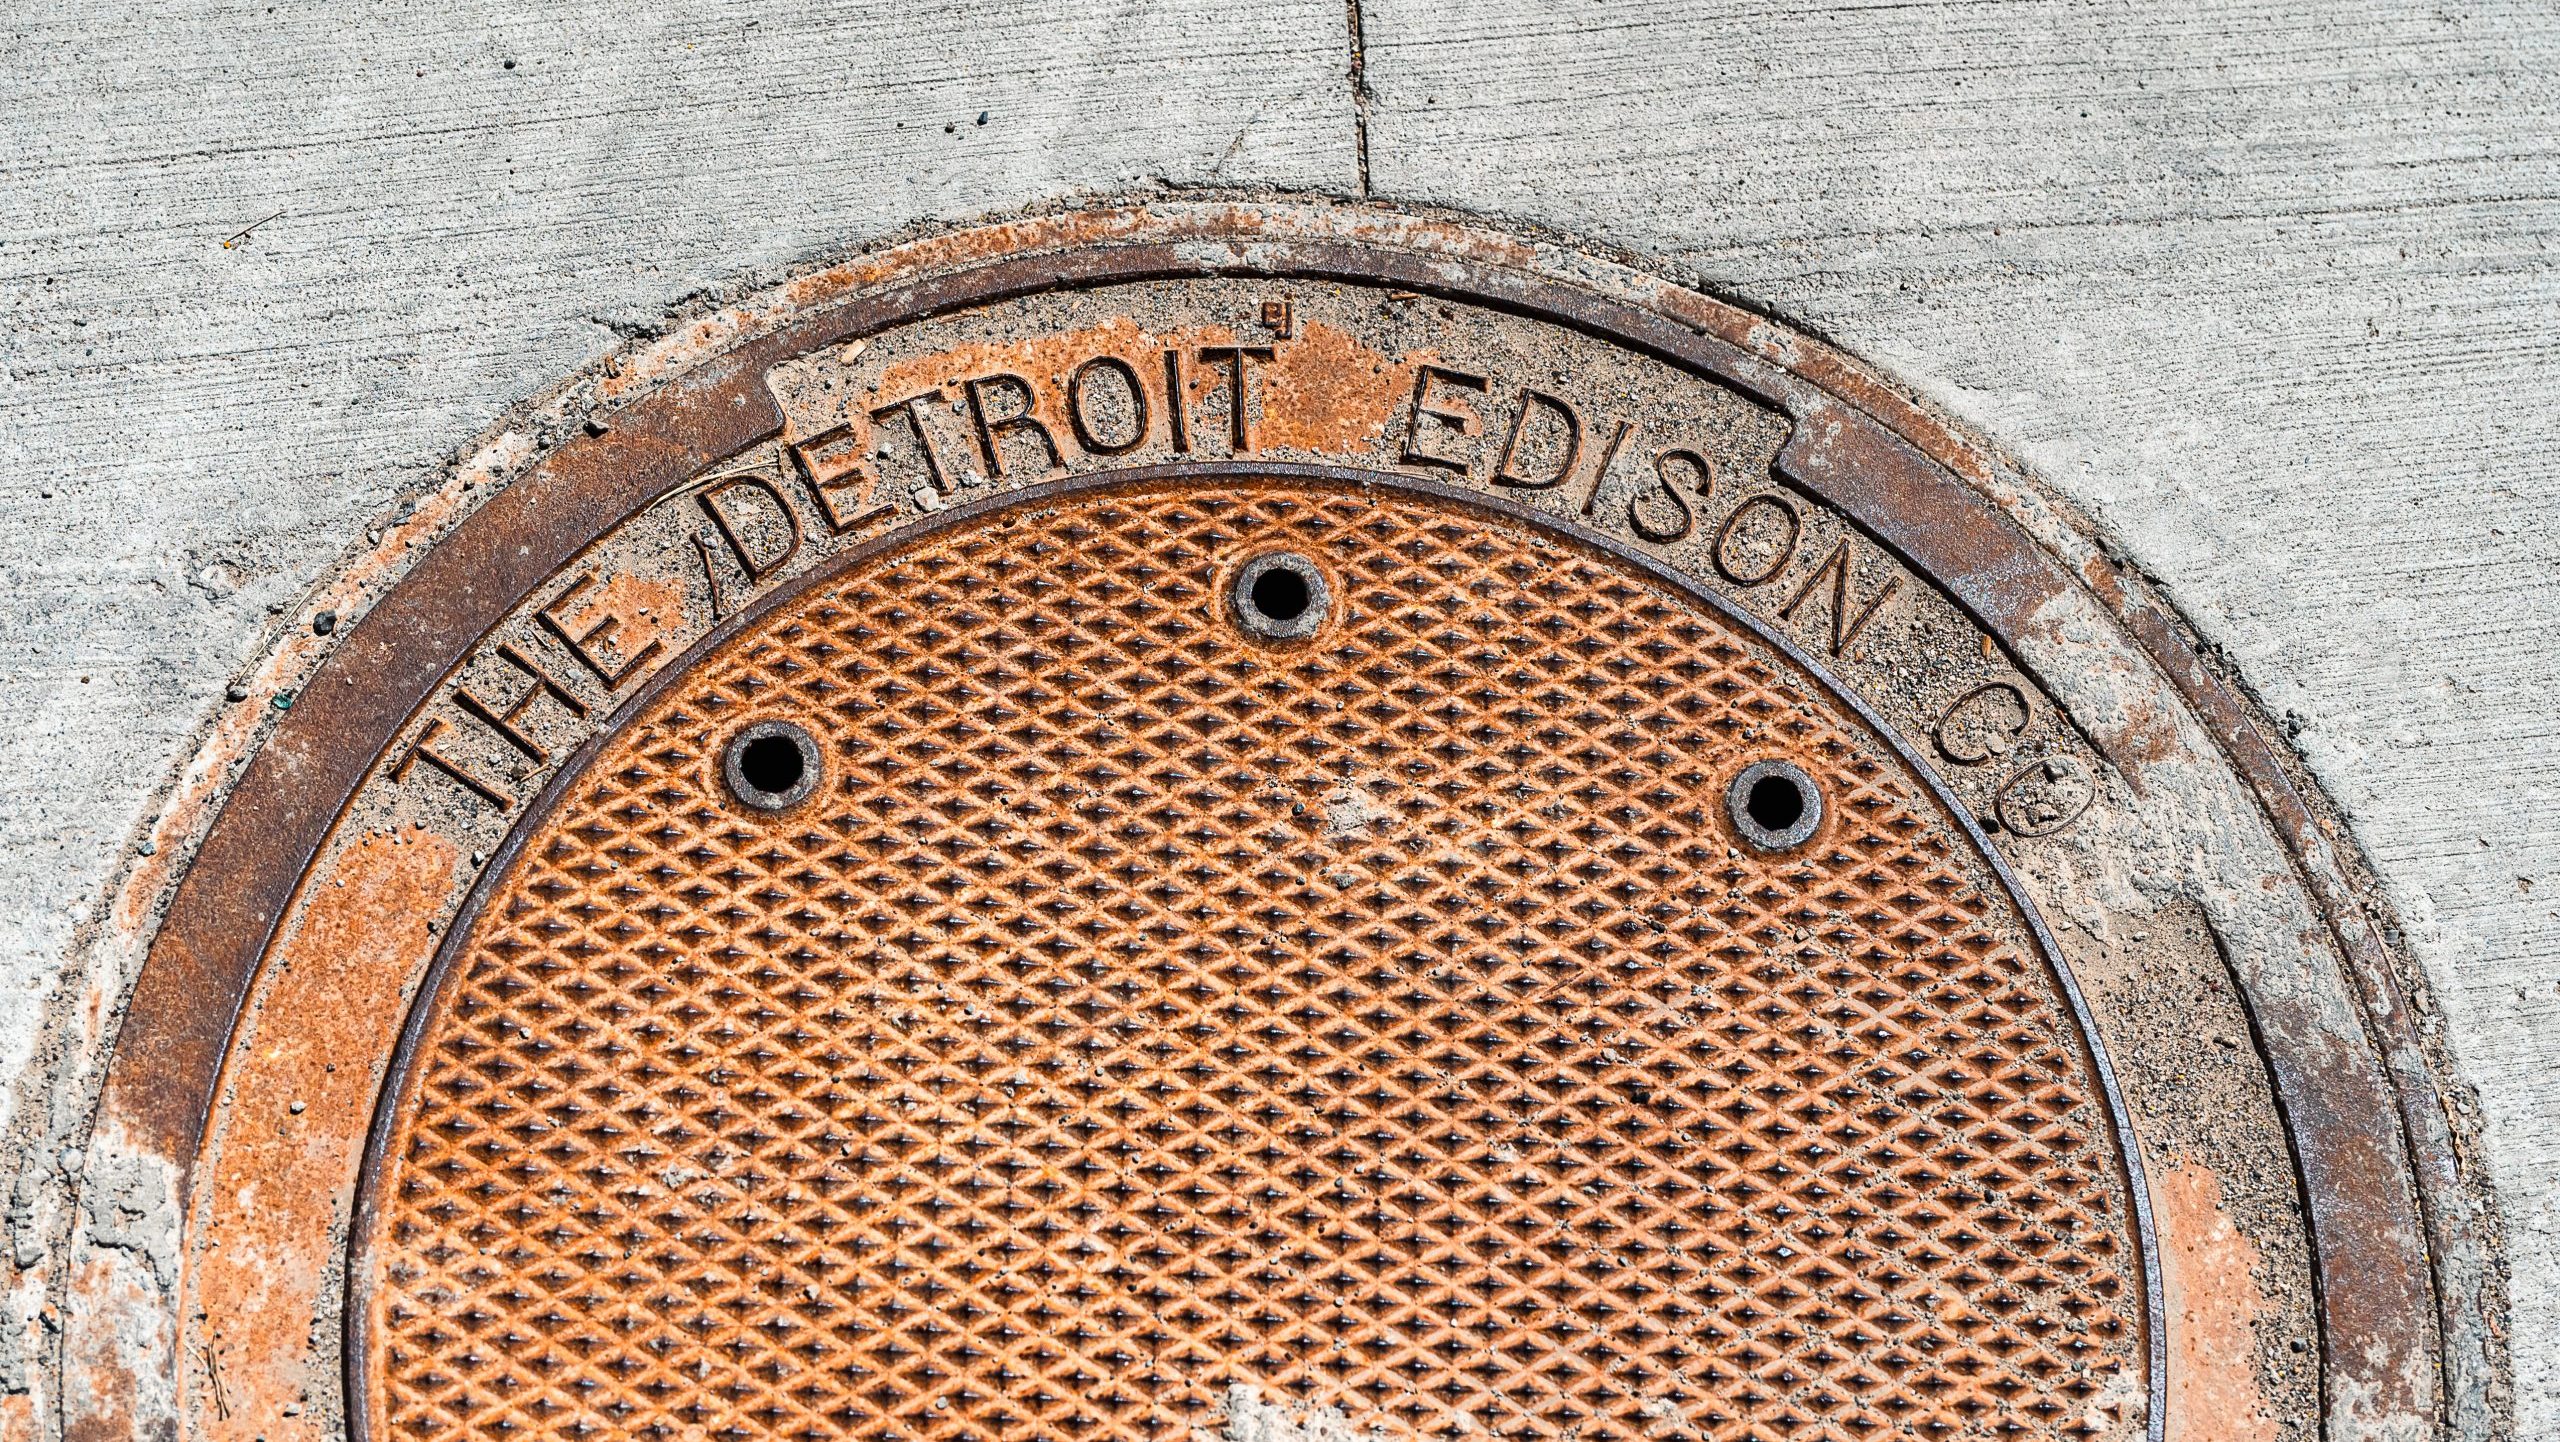 Manhole cover bearing the name of DTE Energy's previous identity the Detroit Edison Company.